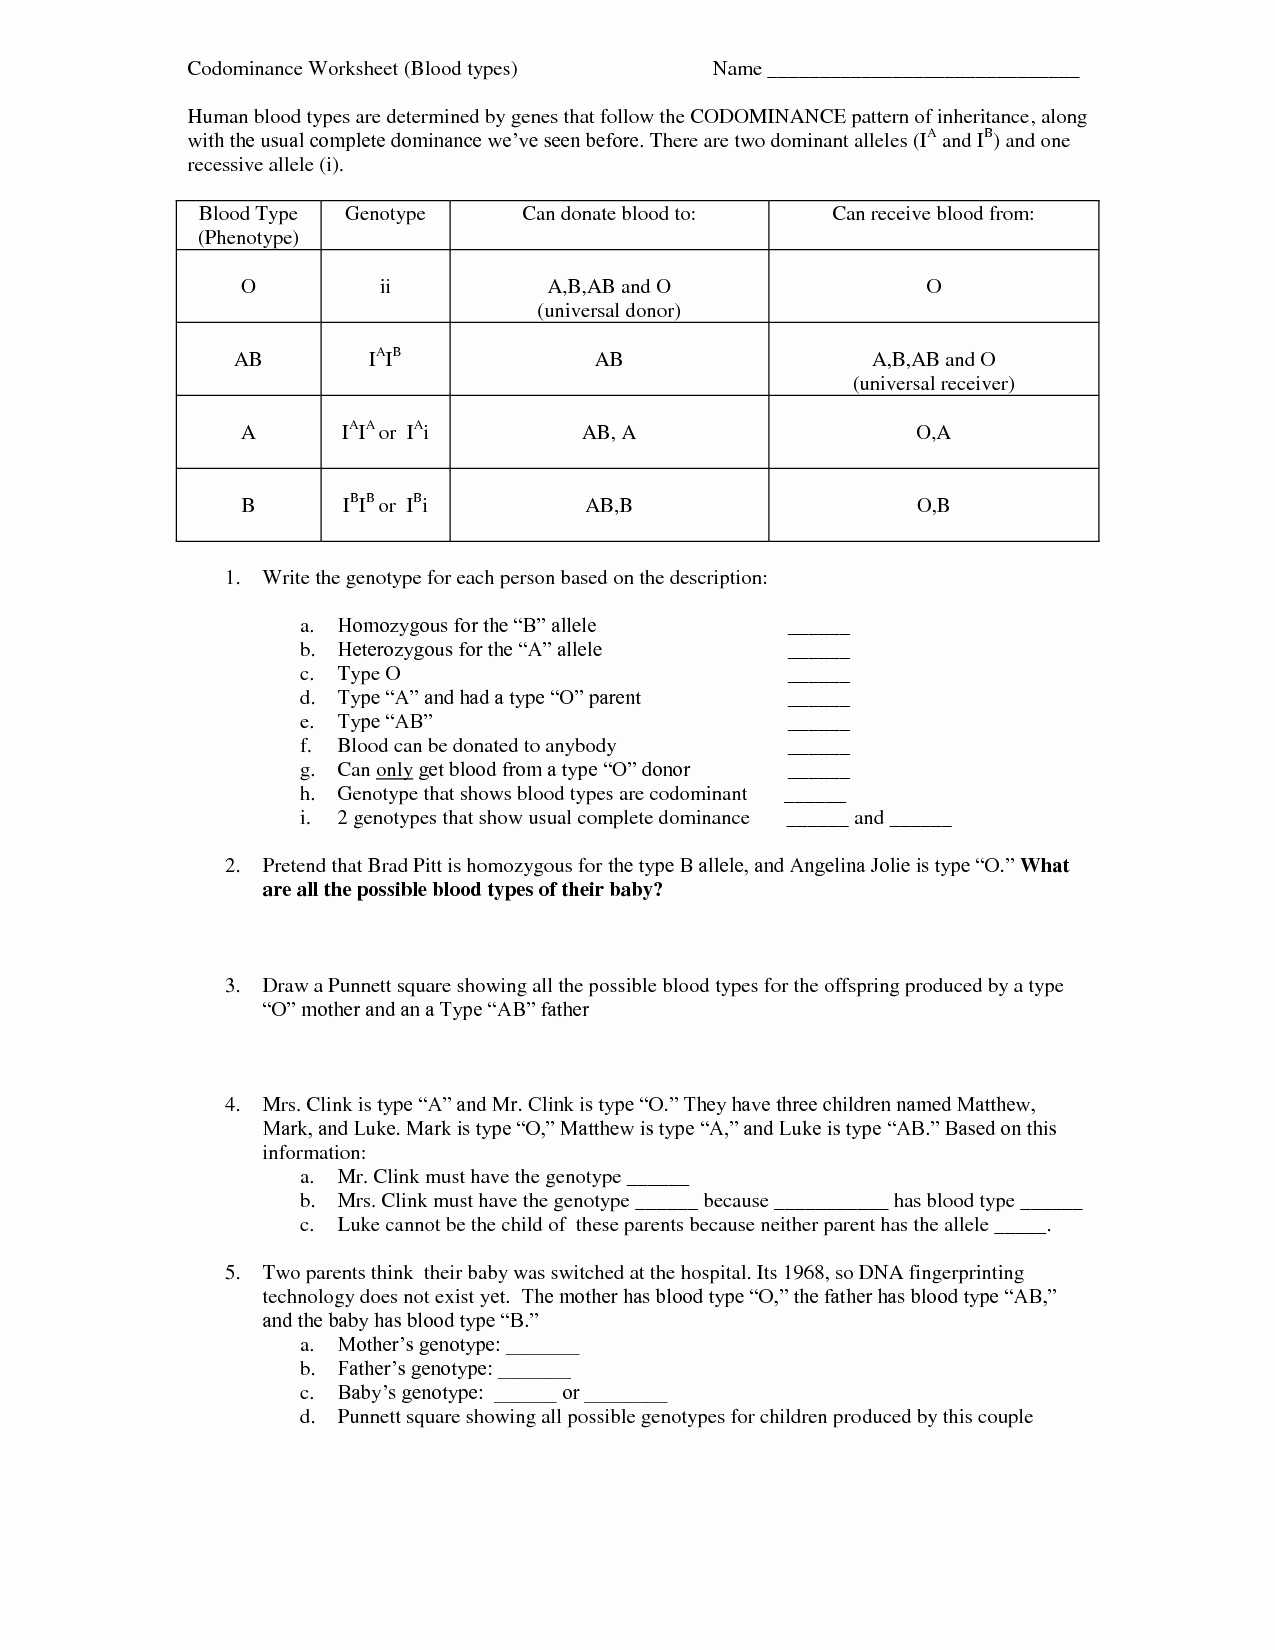 Acids and Bases Worksheet Answers together with Take Charge today Worksheet Answers New Worksheet Acids and Bases